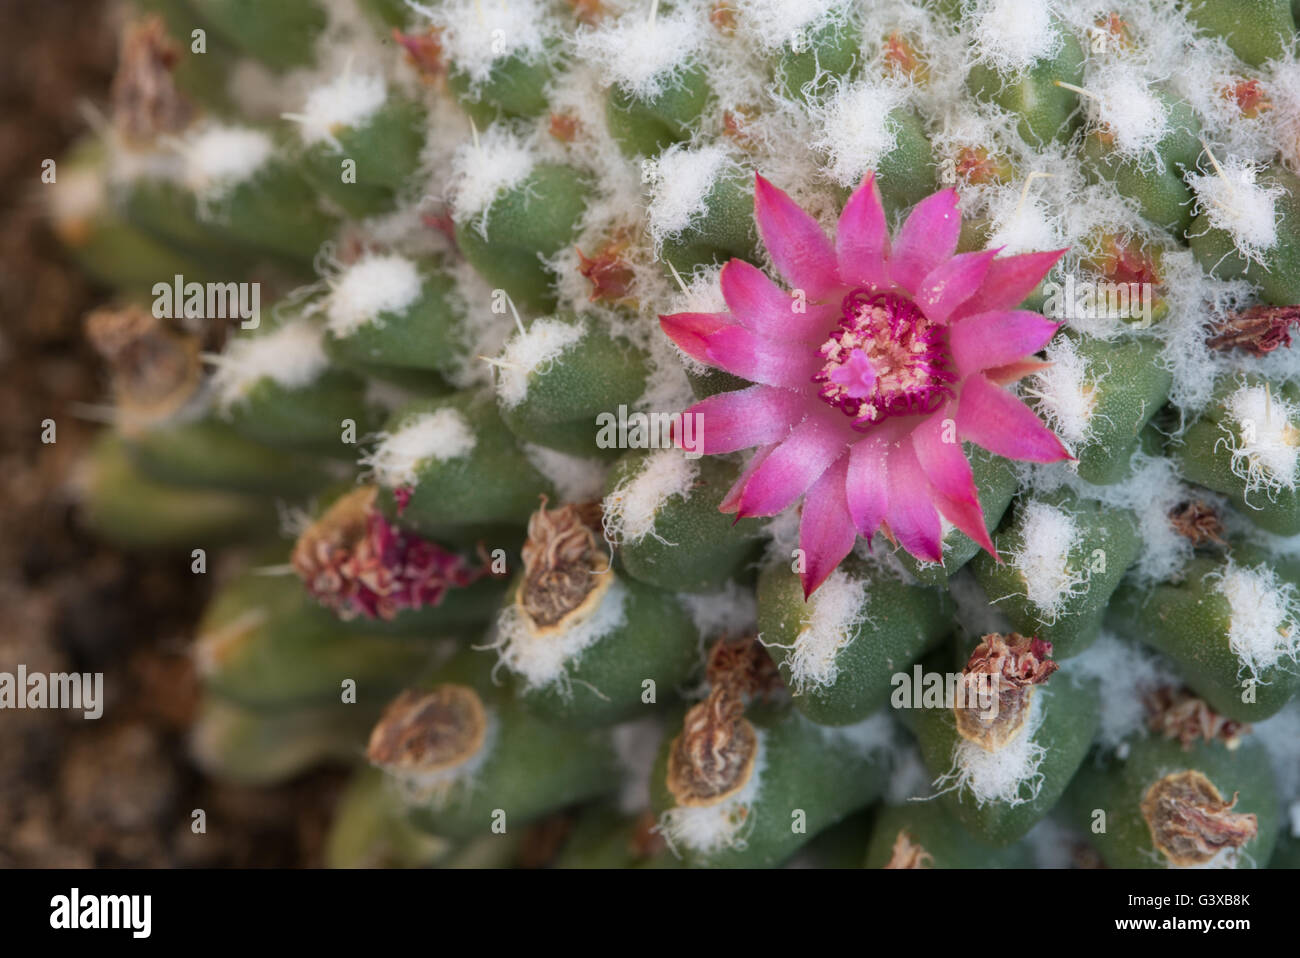 Abstract details of a Mammillaria Geminispina cactus plant with a single  light pink blooming flower Stock Photo